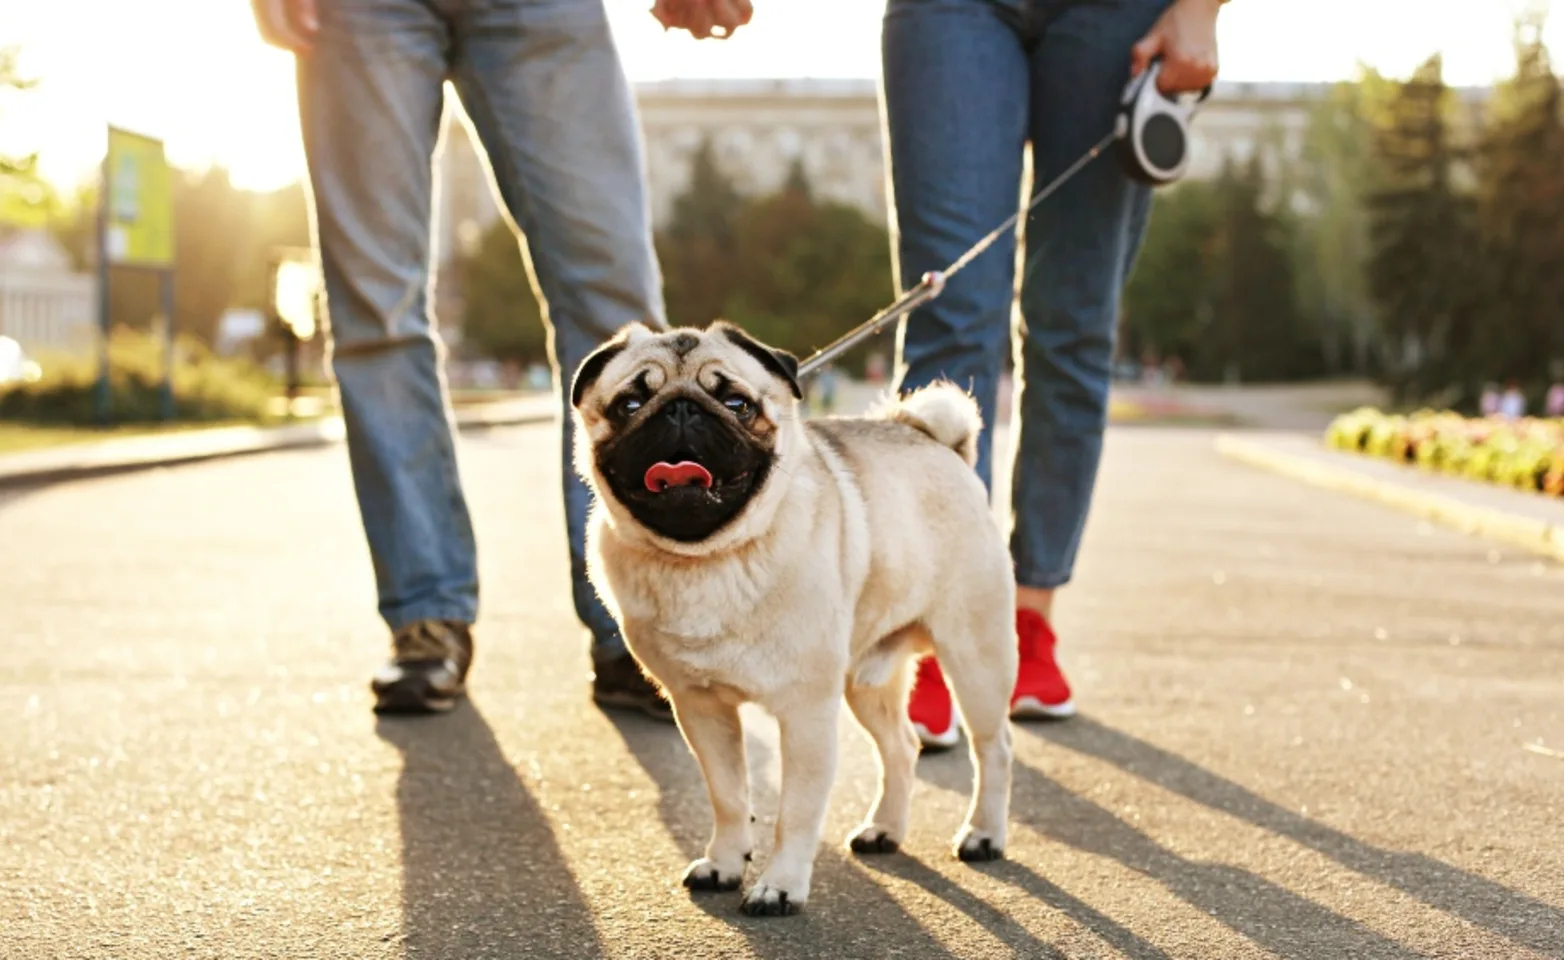 A pug being walked by two people during the sunset